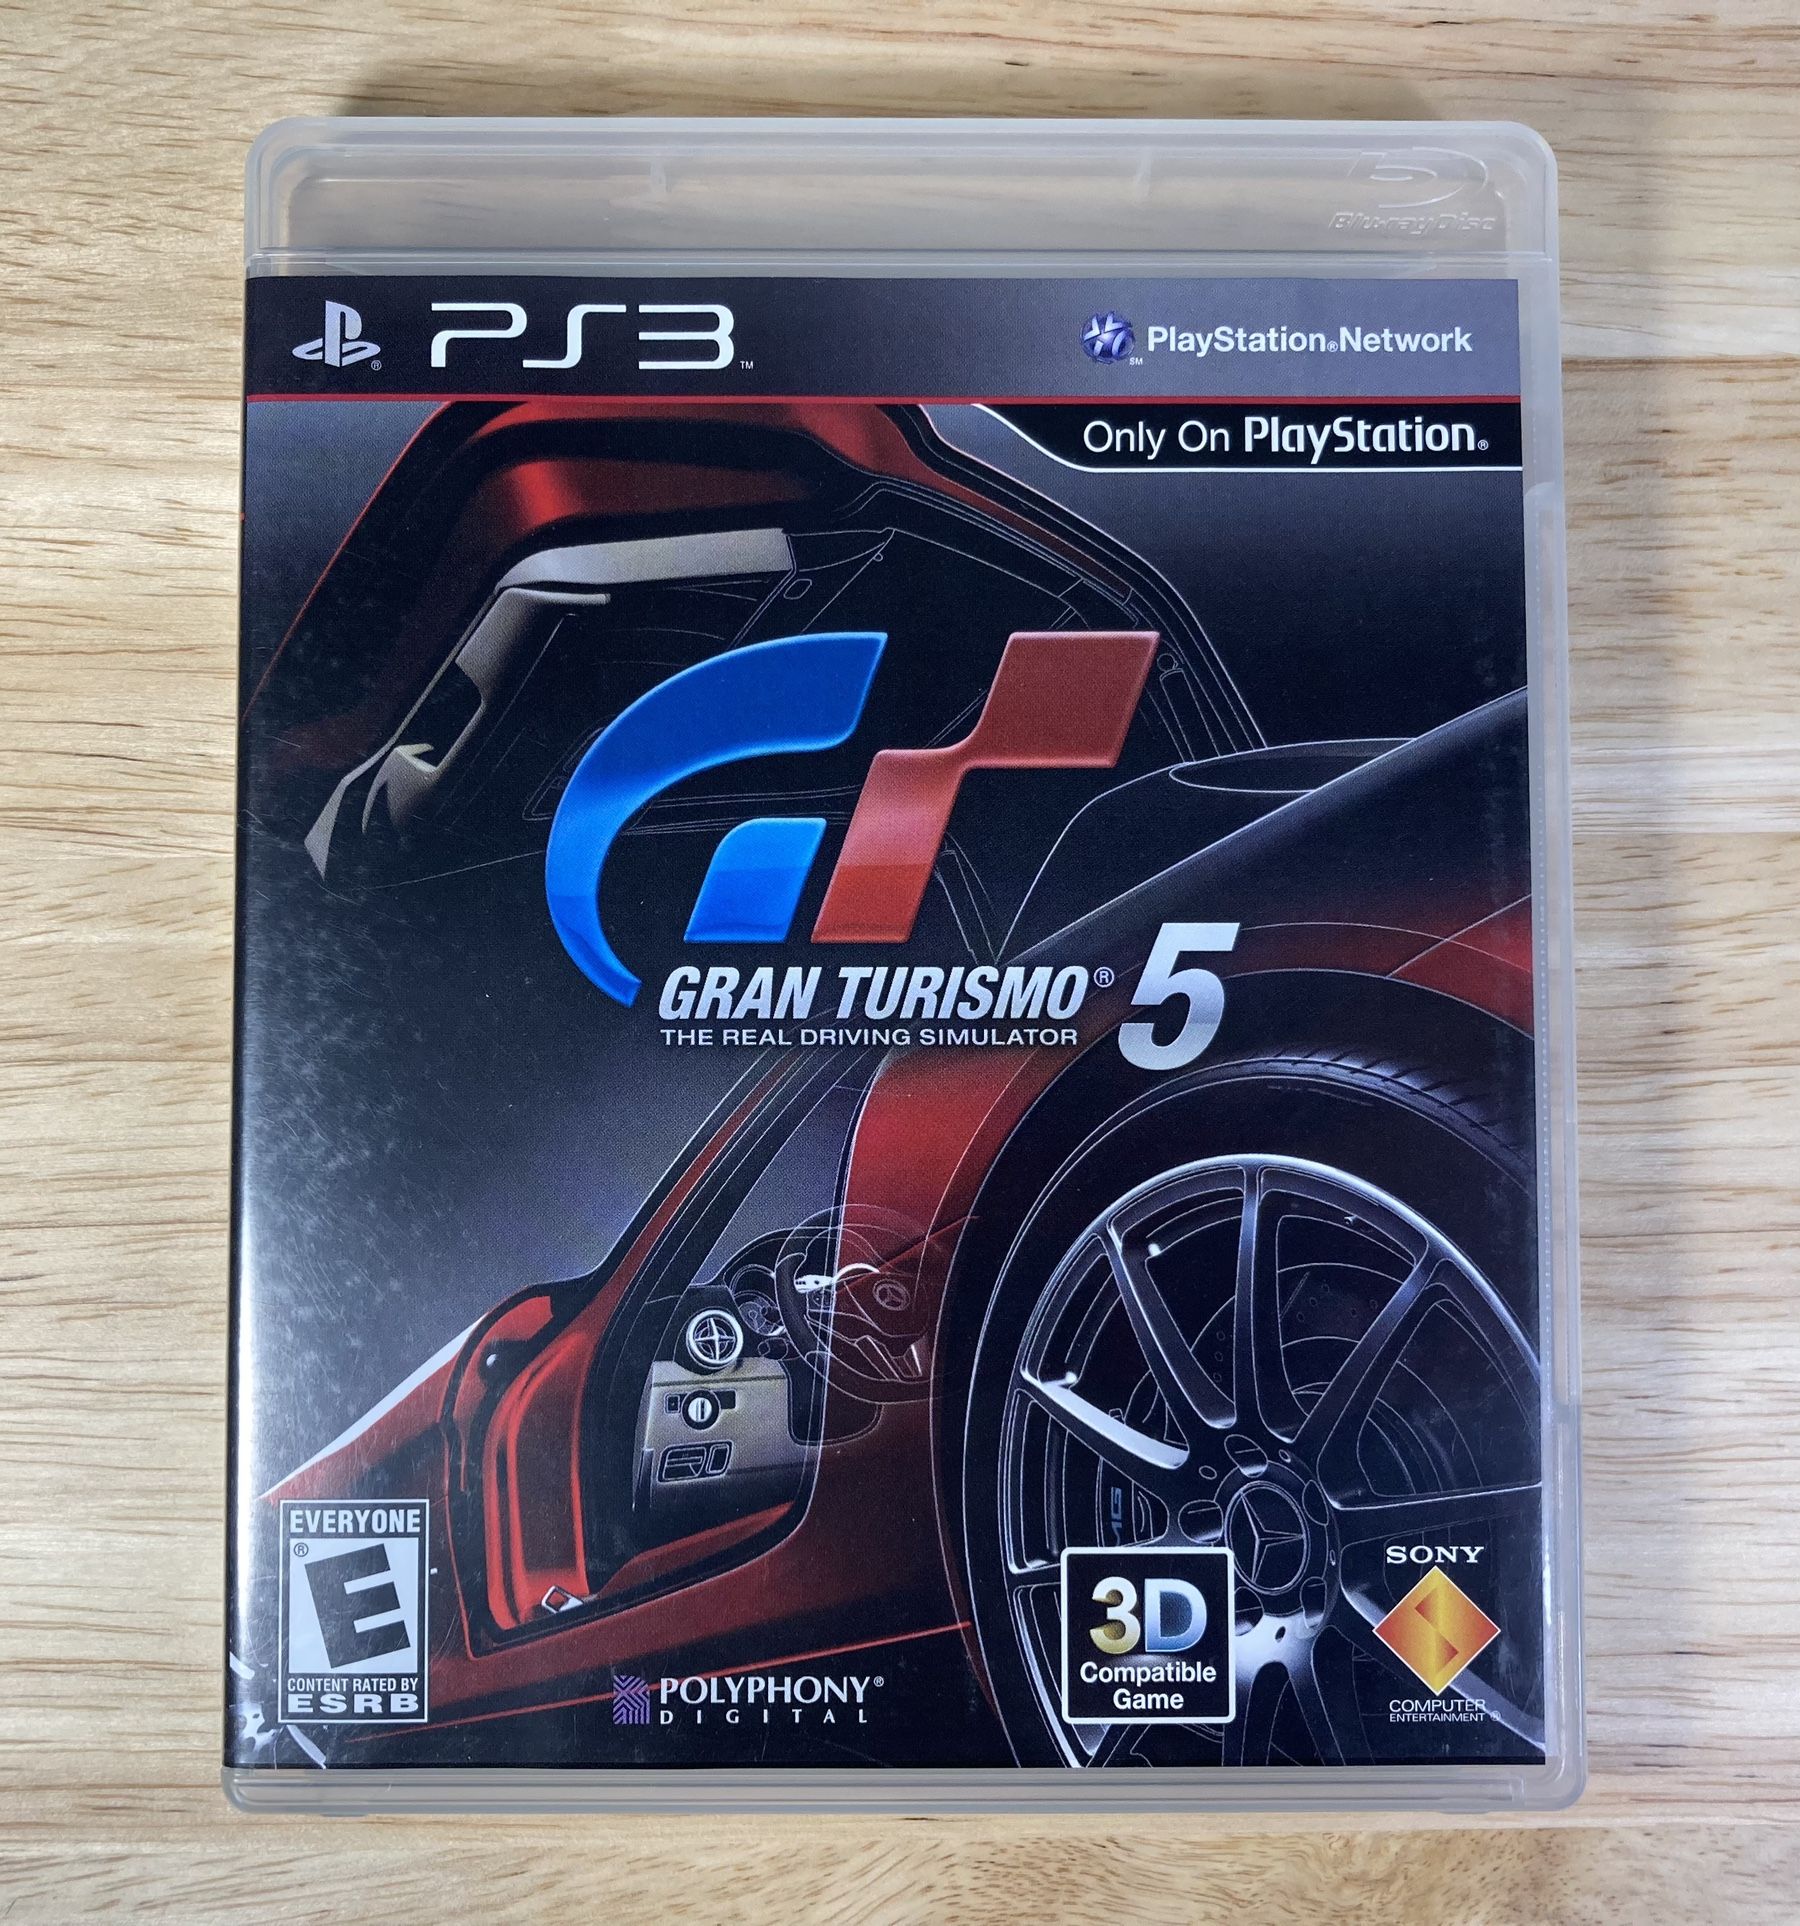 Gran Turismo 5 on PlayStation 3 (PS3)